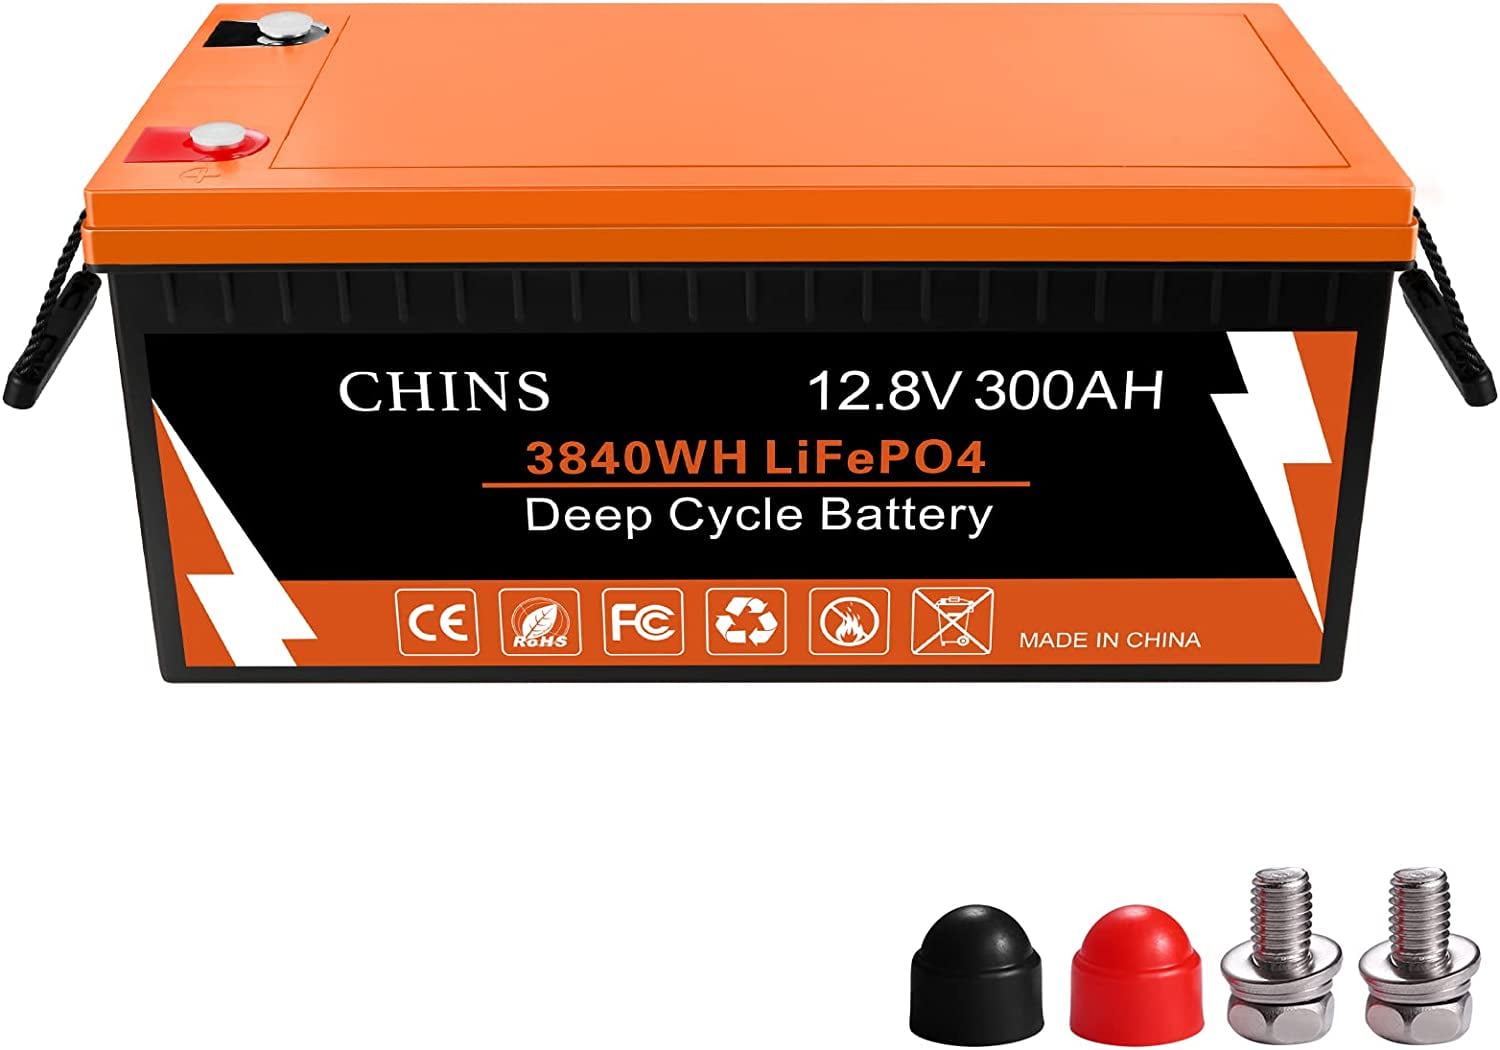 CHINS Smart LiFePO4 Lithium Iron Battery 12.8V 300Ah for solar home 